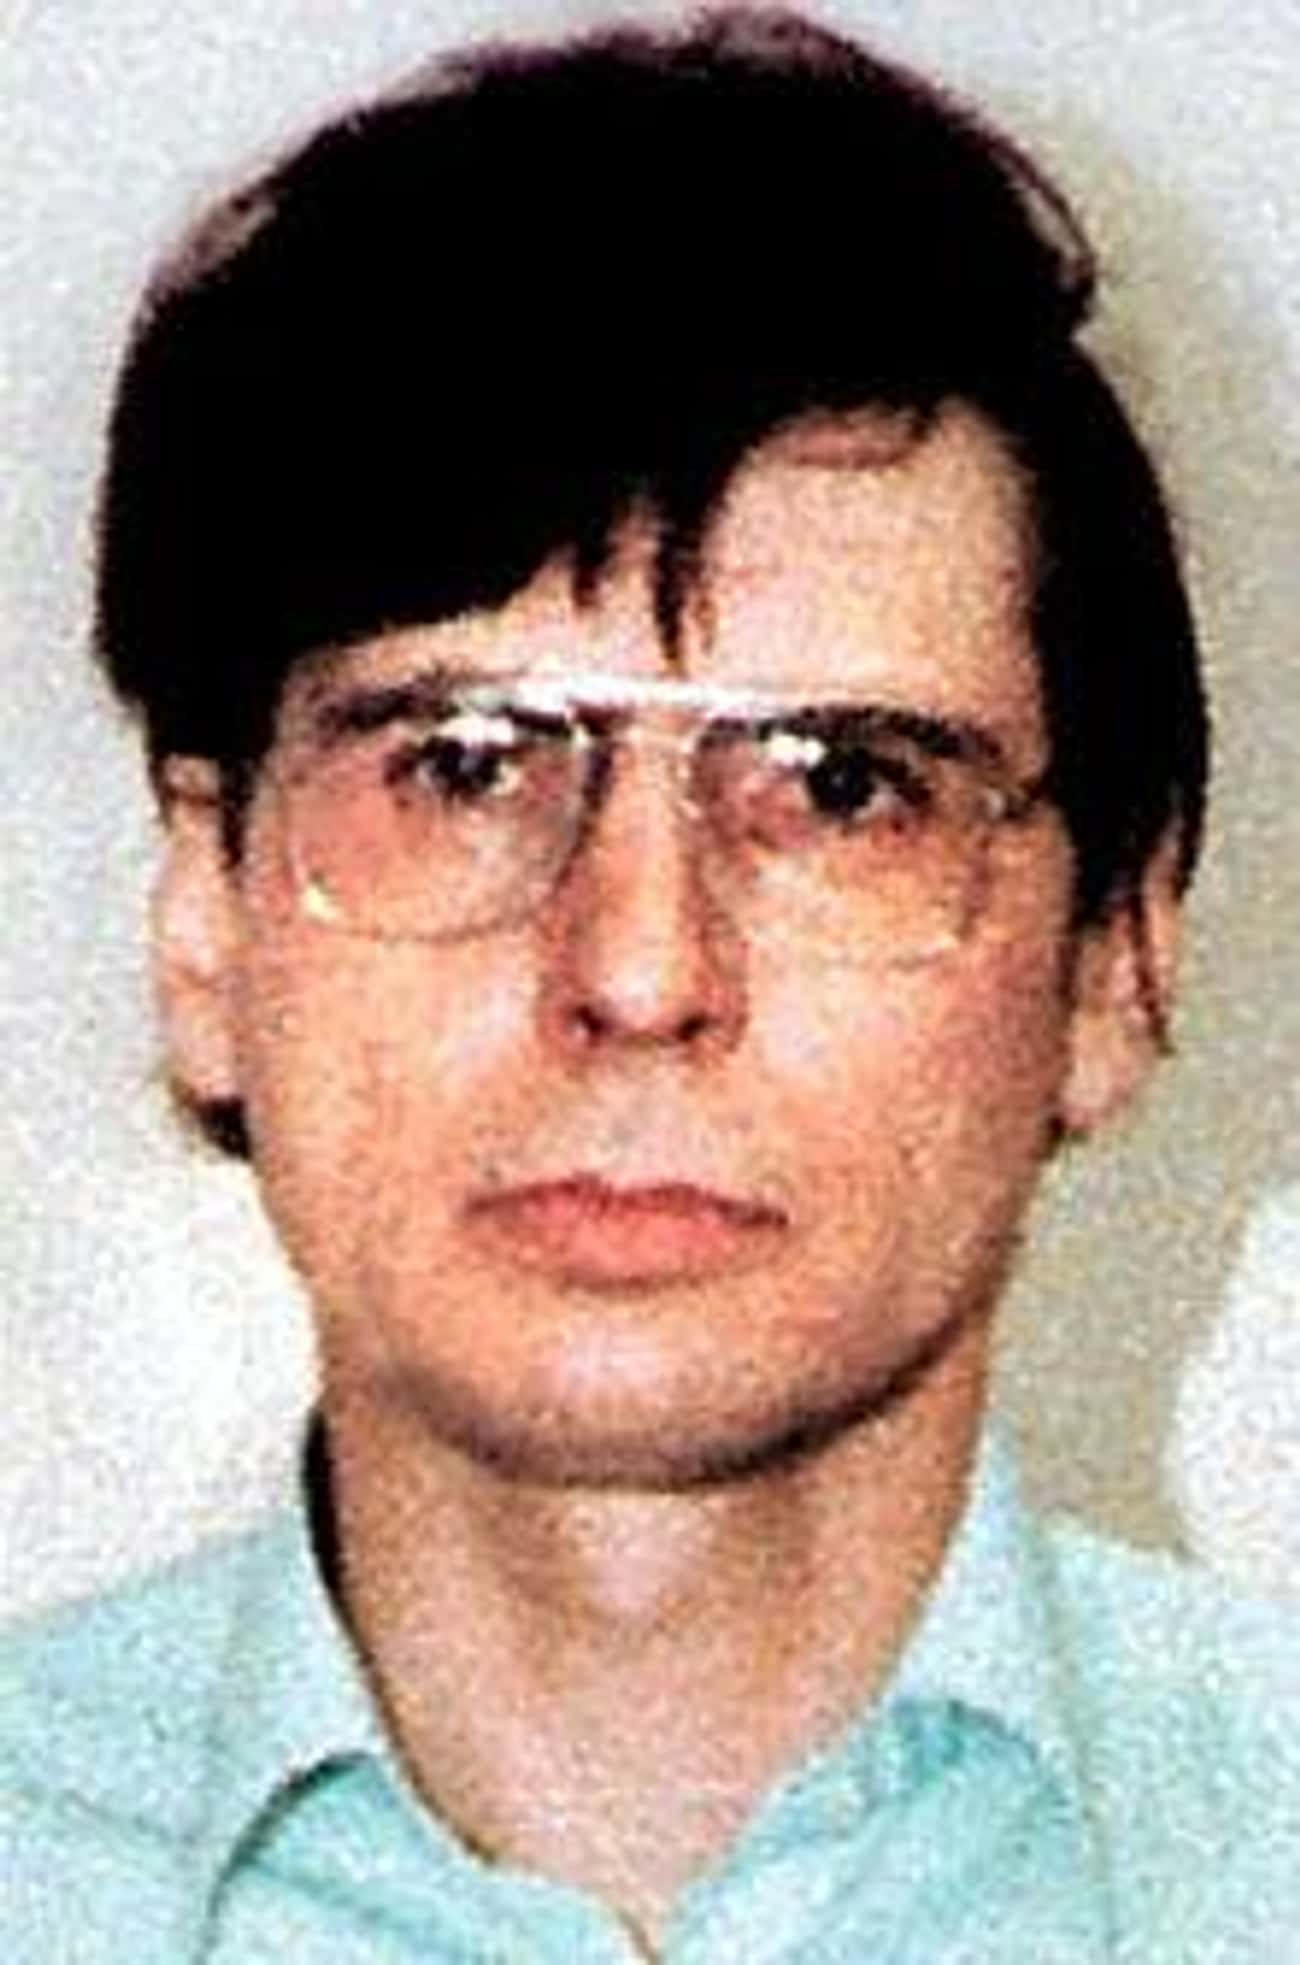 Dennis Nilsen's Mother Wanted To Ask Him Why He Killed